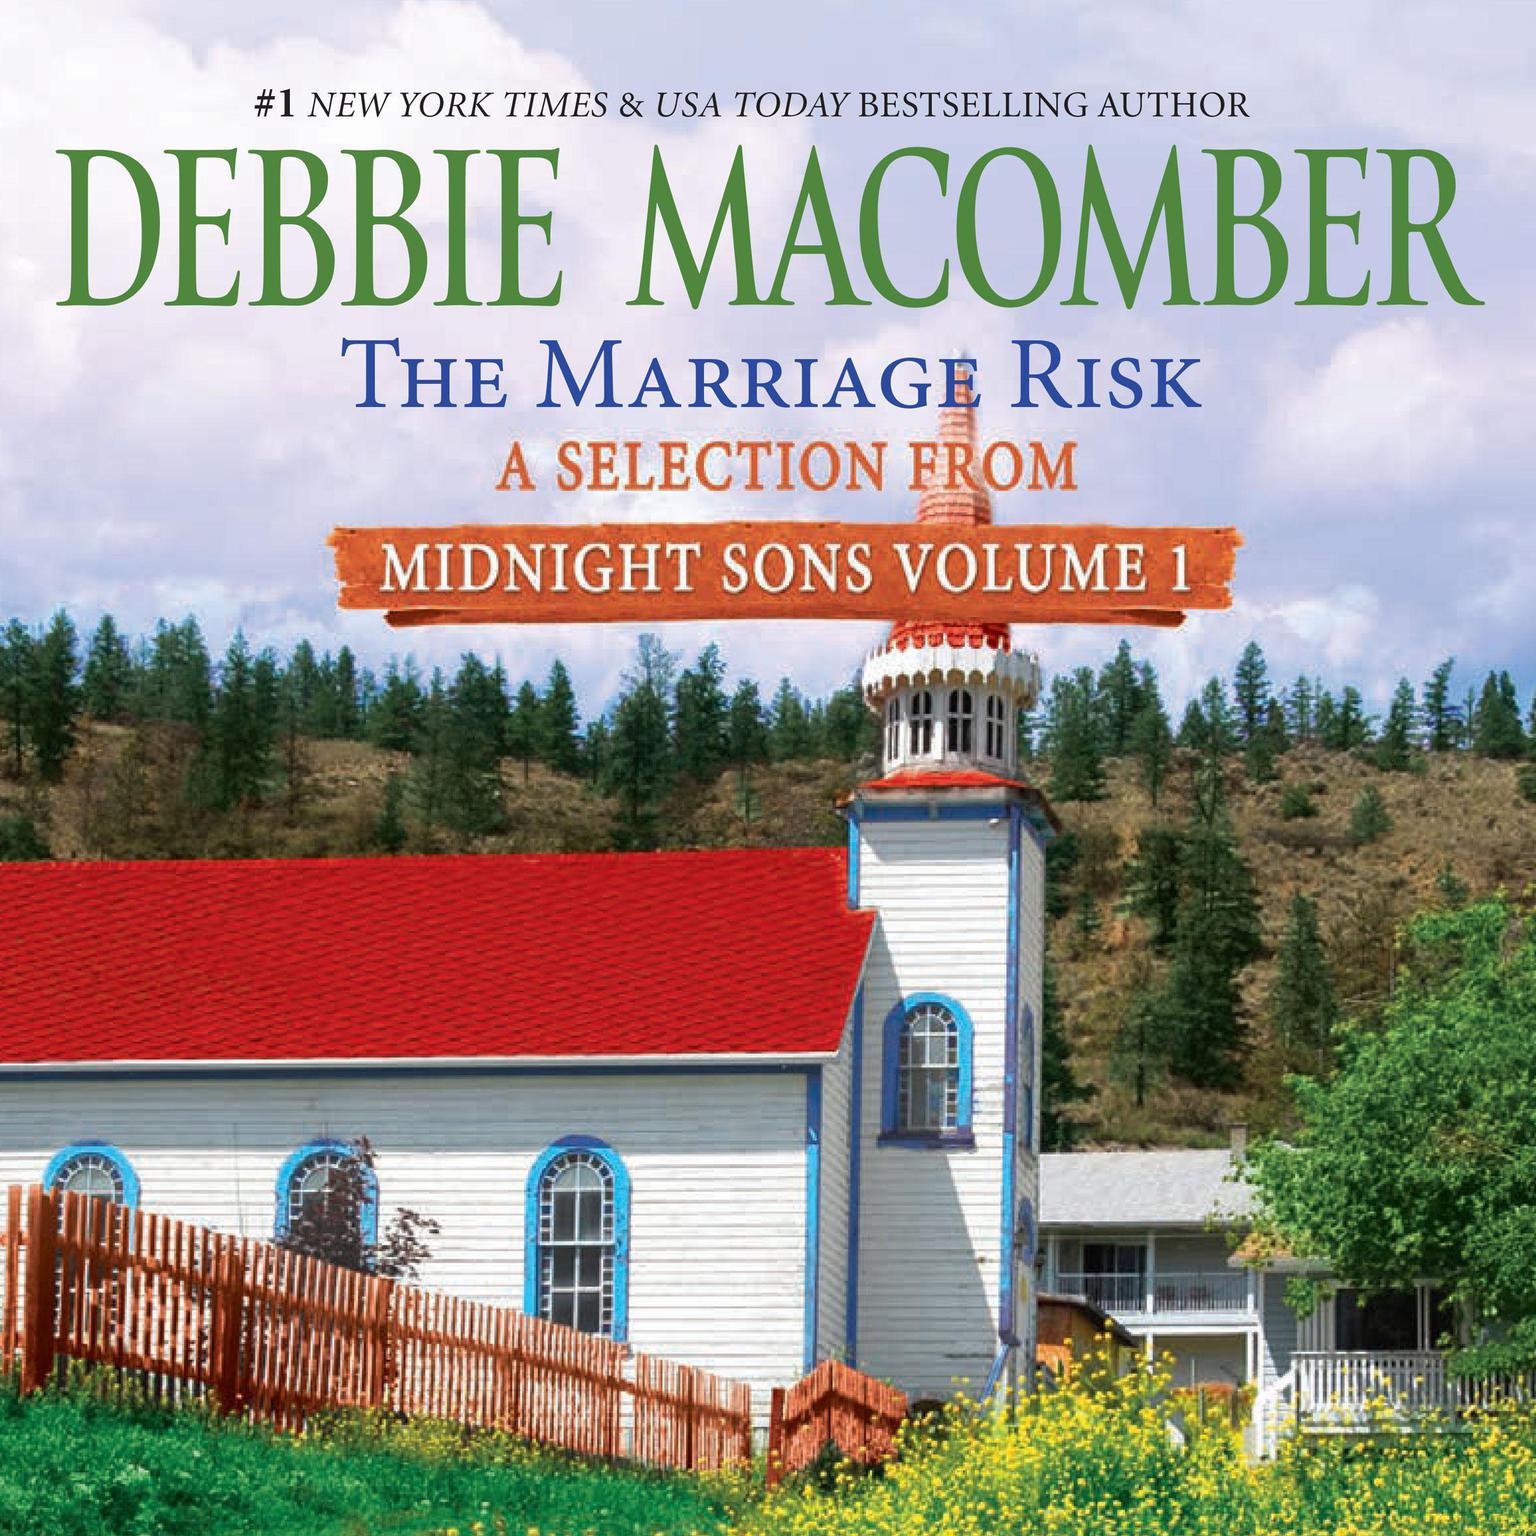 Marriage Risk, The: A Selection from Midnight Sons Volume 1 Audiobook, by Debbie Macomber